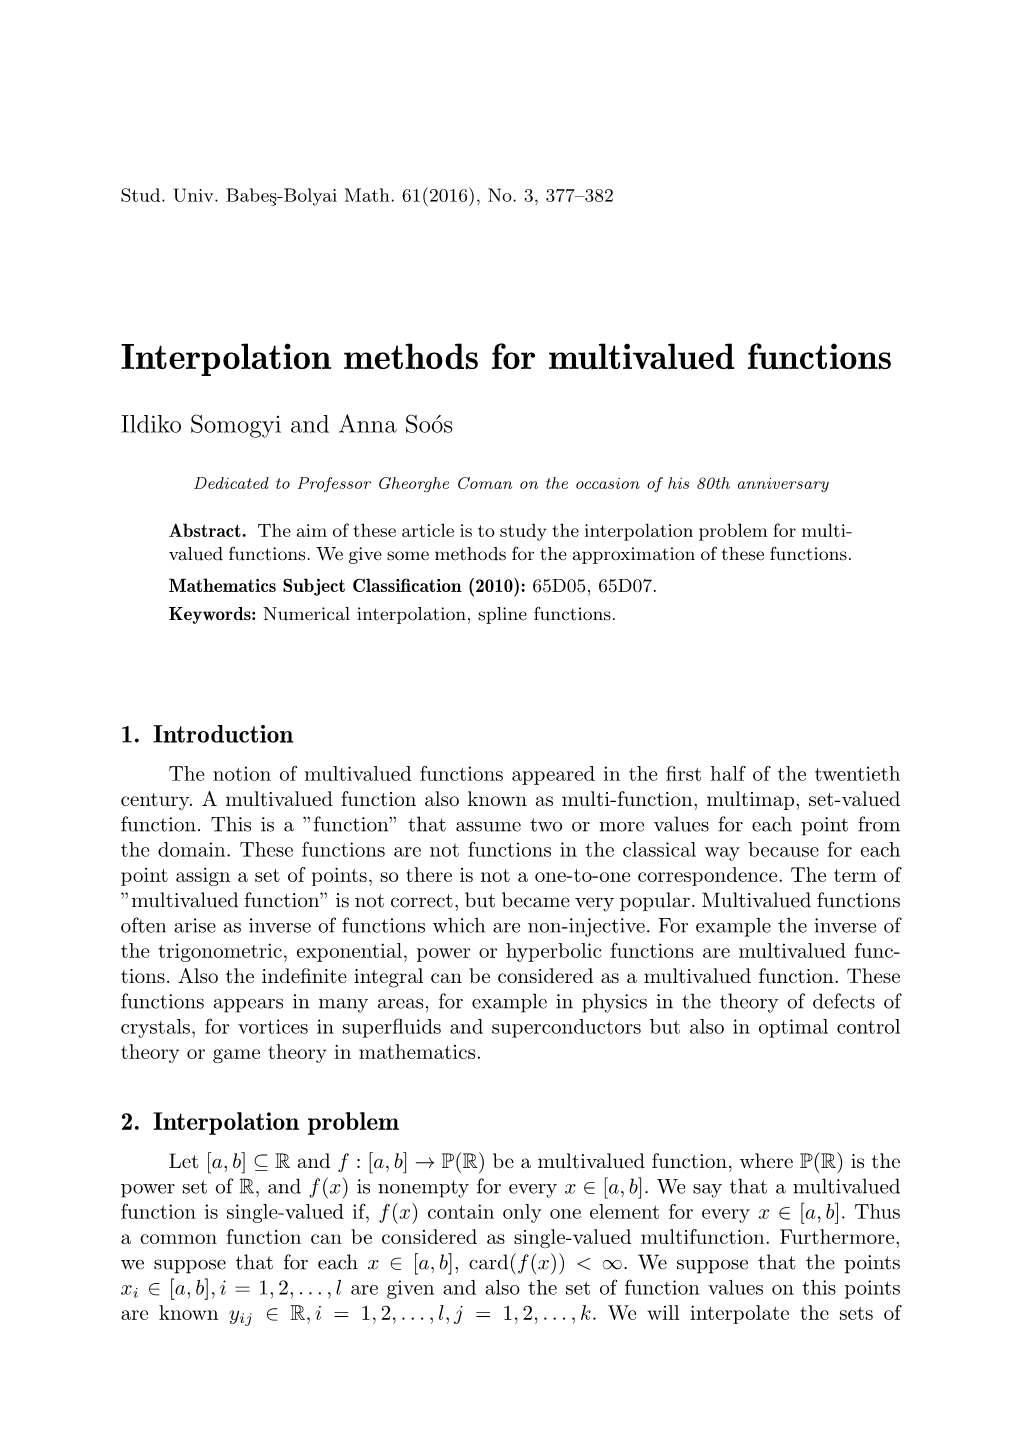 Interpolation Methods for Multivalued Functions